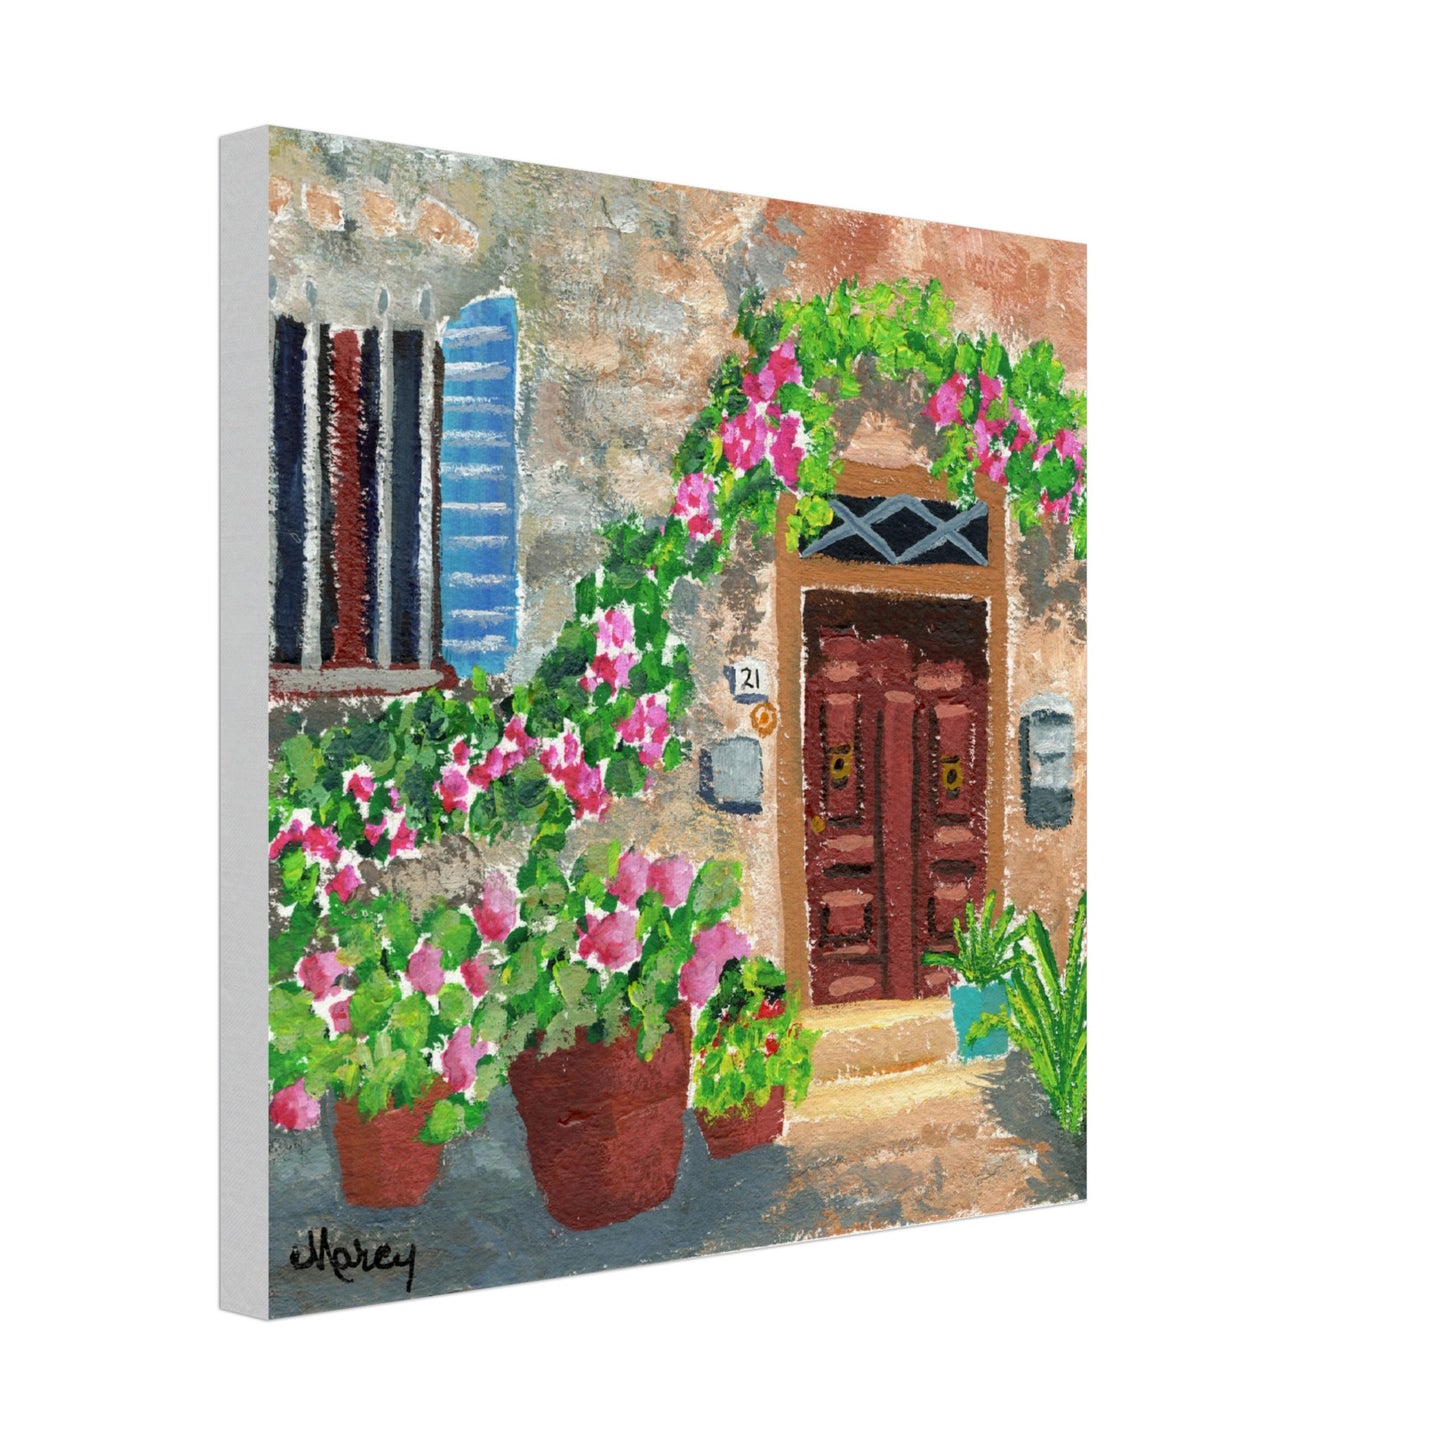 At Home in Italy — Impressionistic Gouache Painting Printed on Stretched Canvas